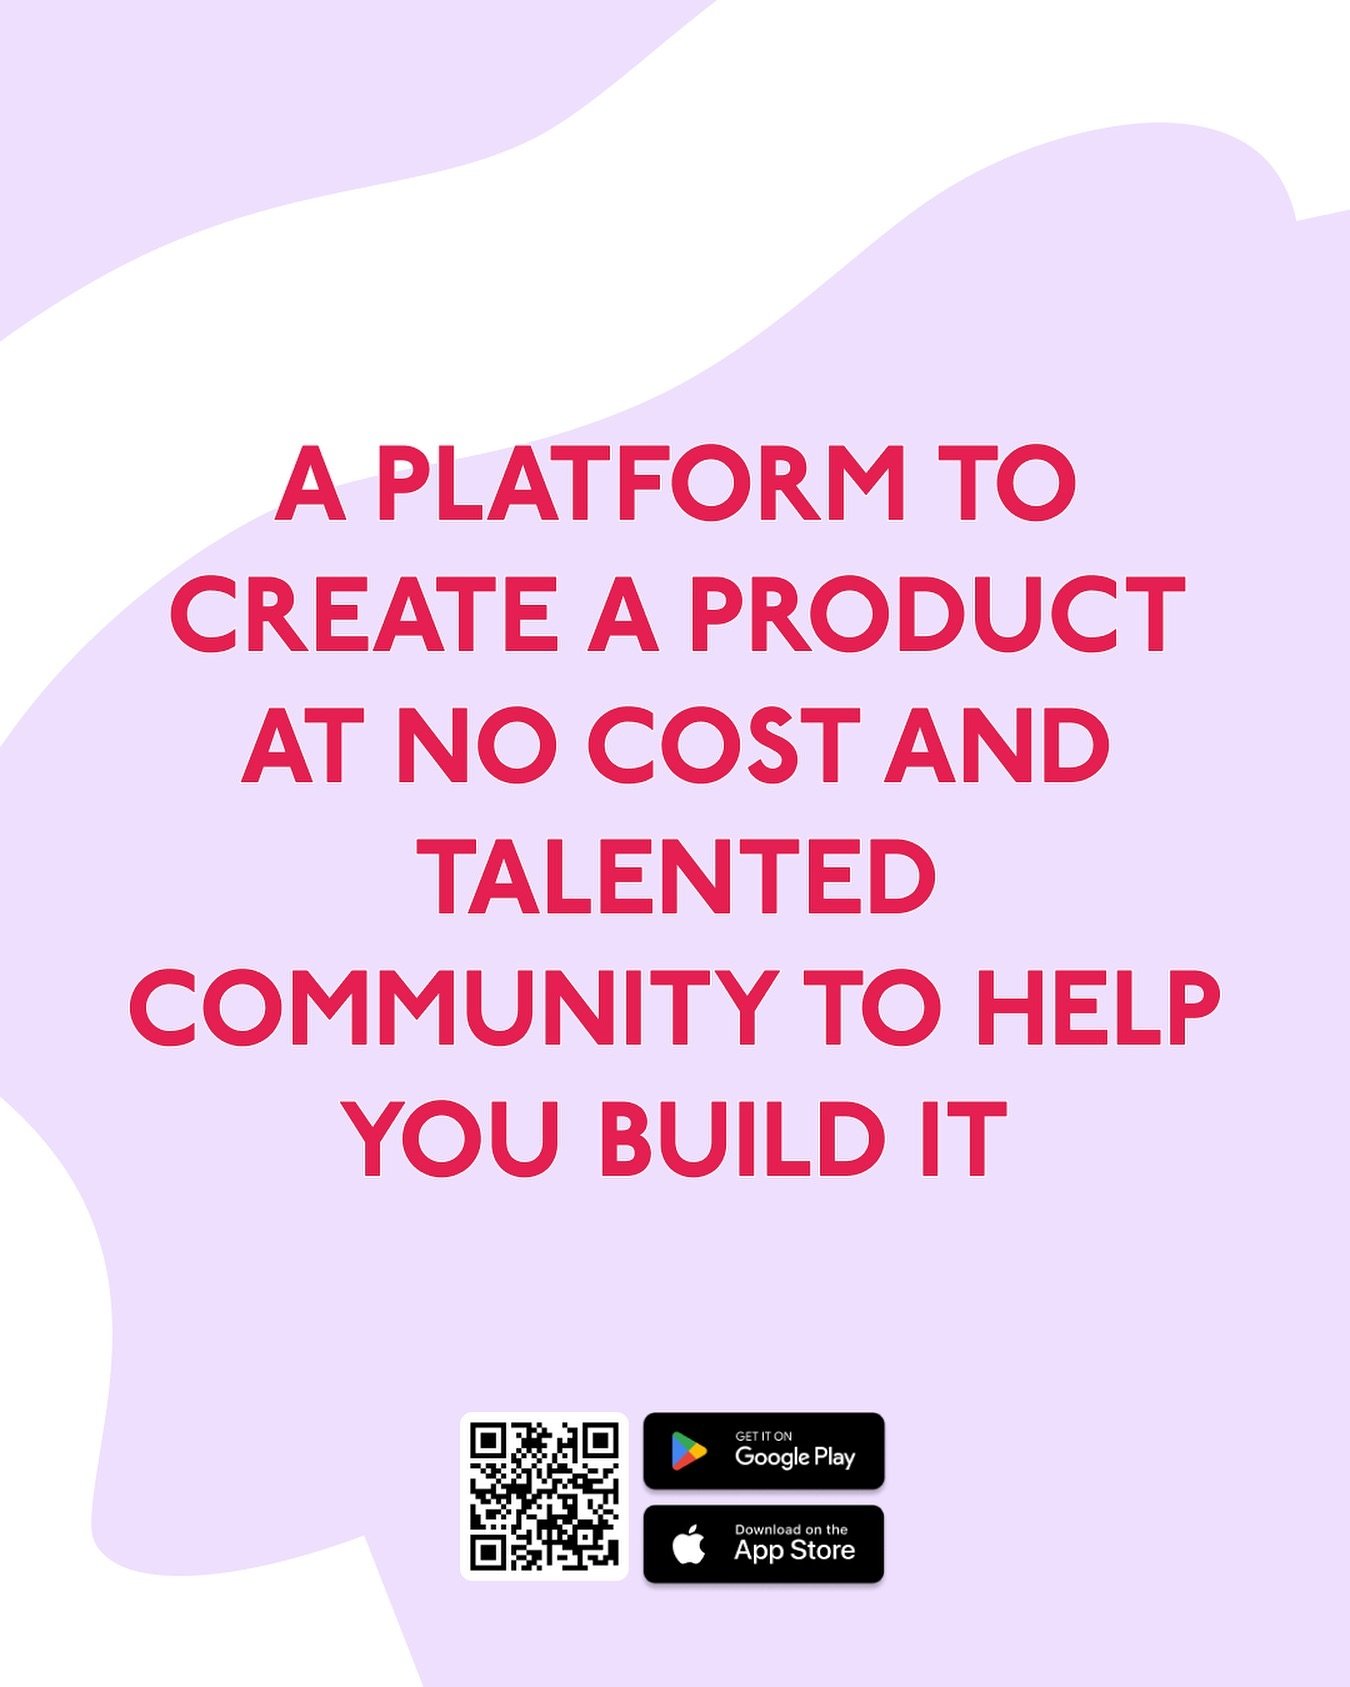 Join Lonch and start working on your product!

#lonch
#app
#entrepreneurs